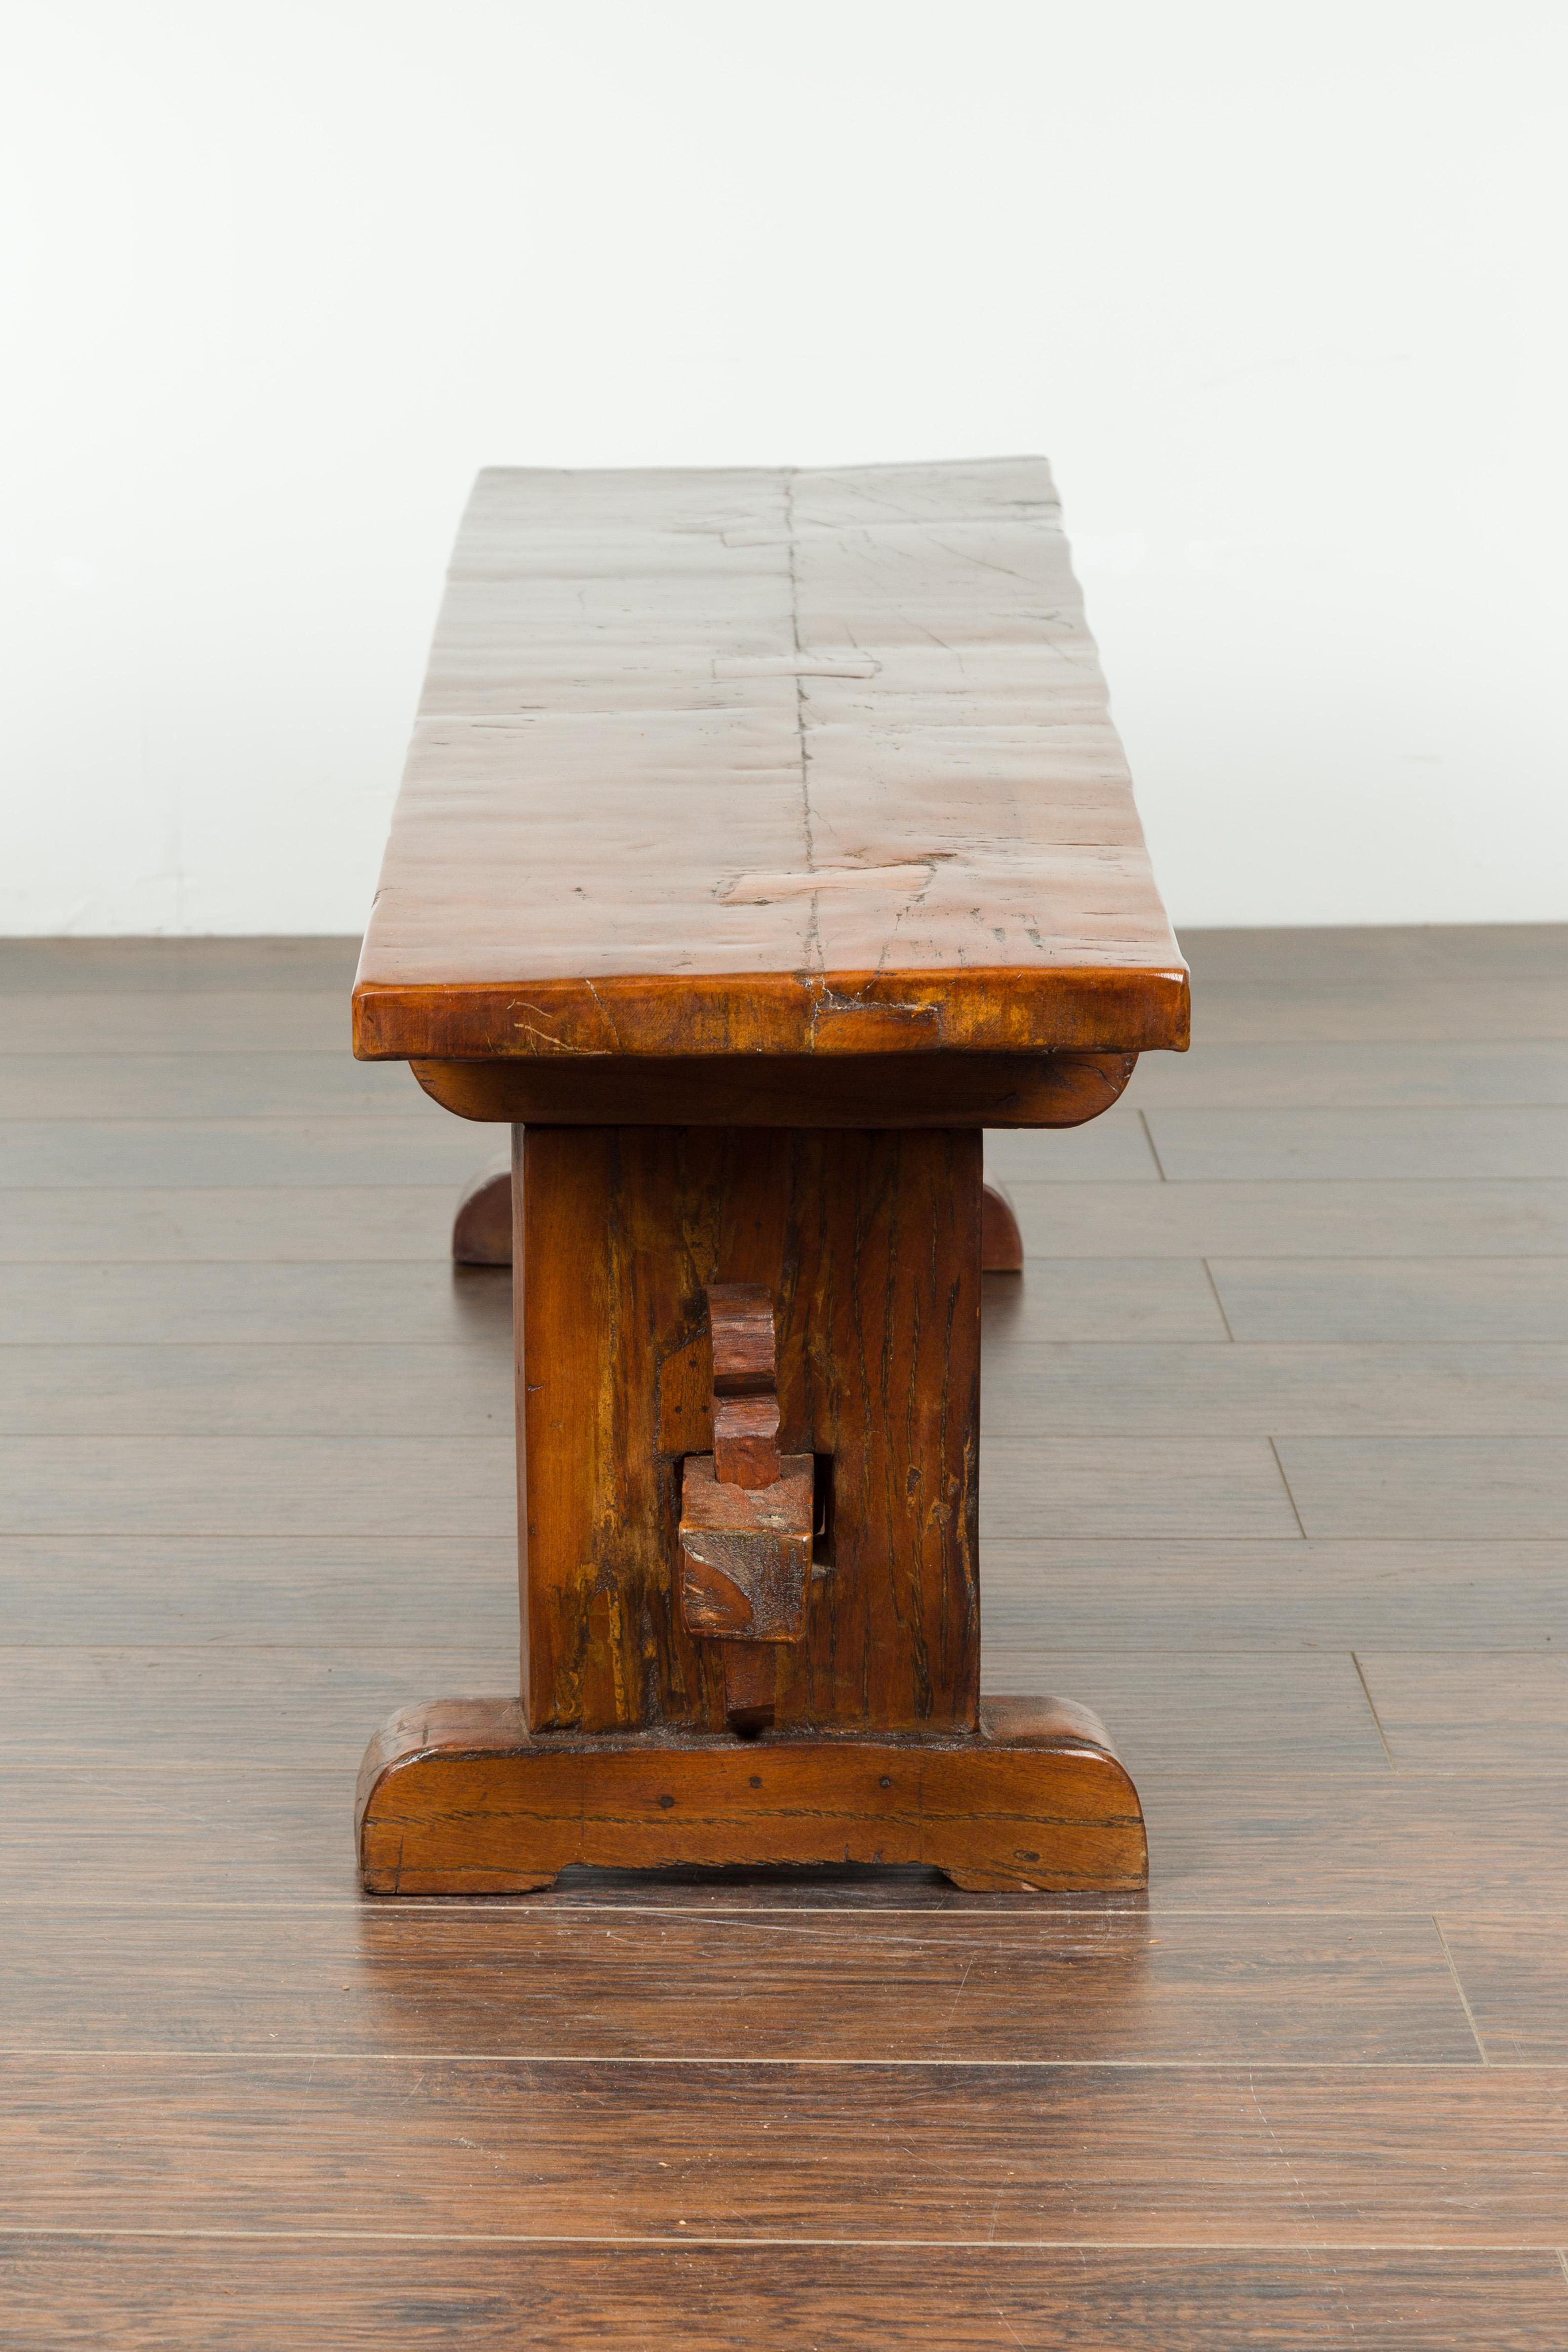 Rustic Italian Walnut Bench with Trestle Base from the Early 19th Century 13